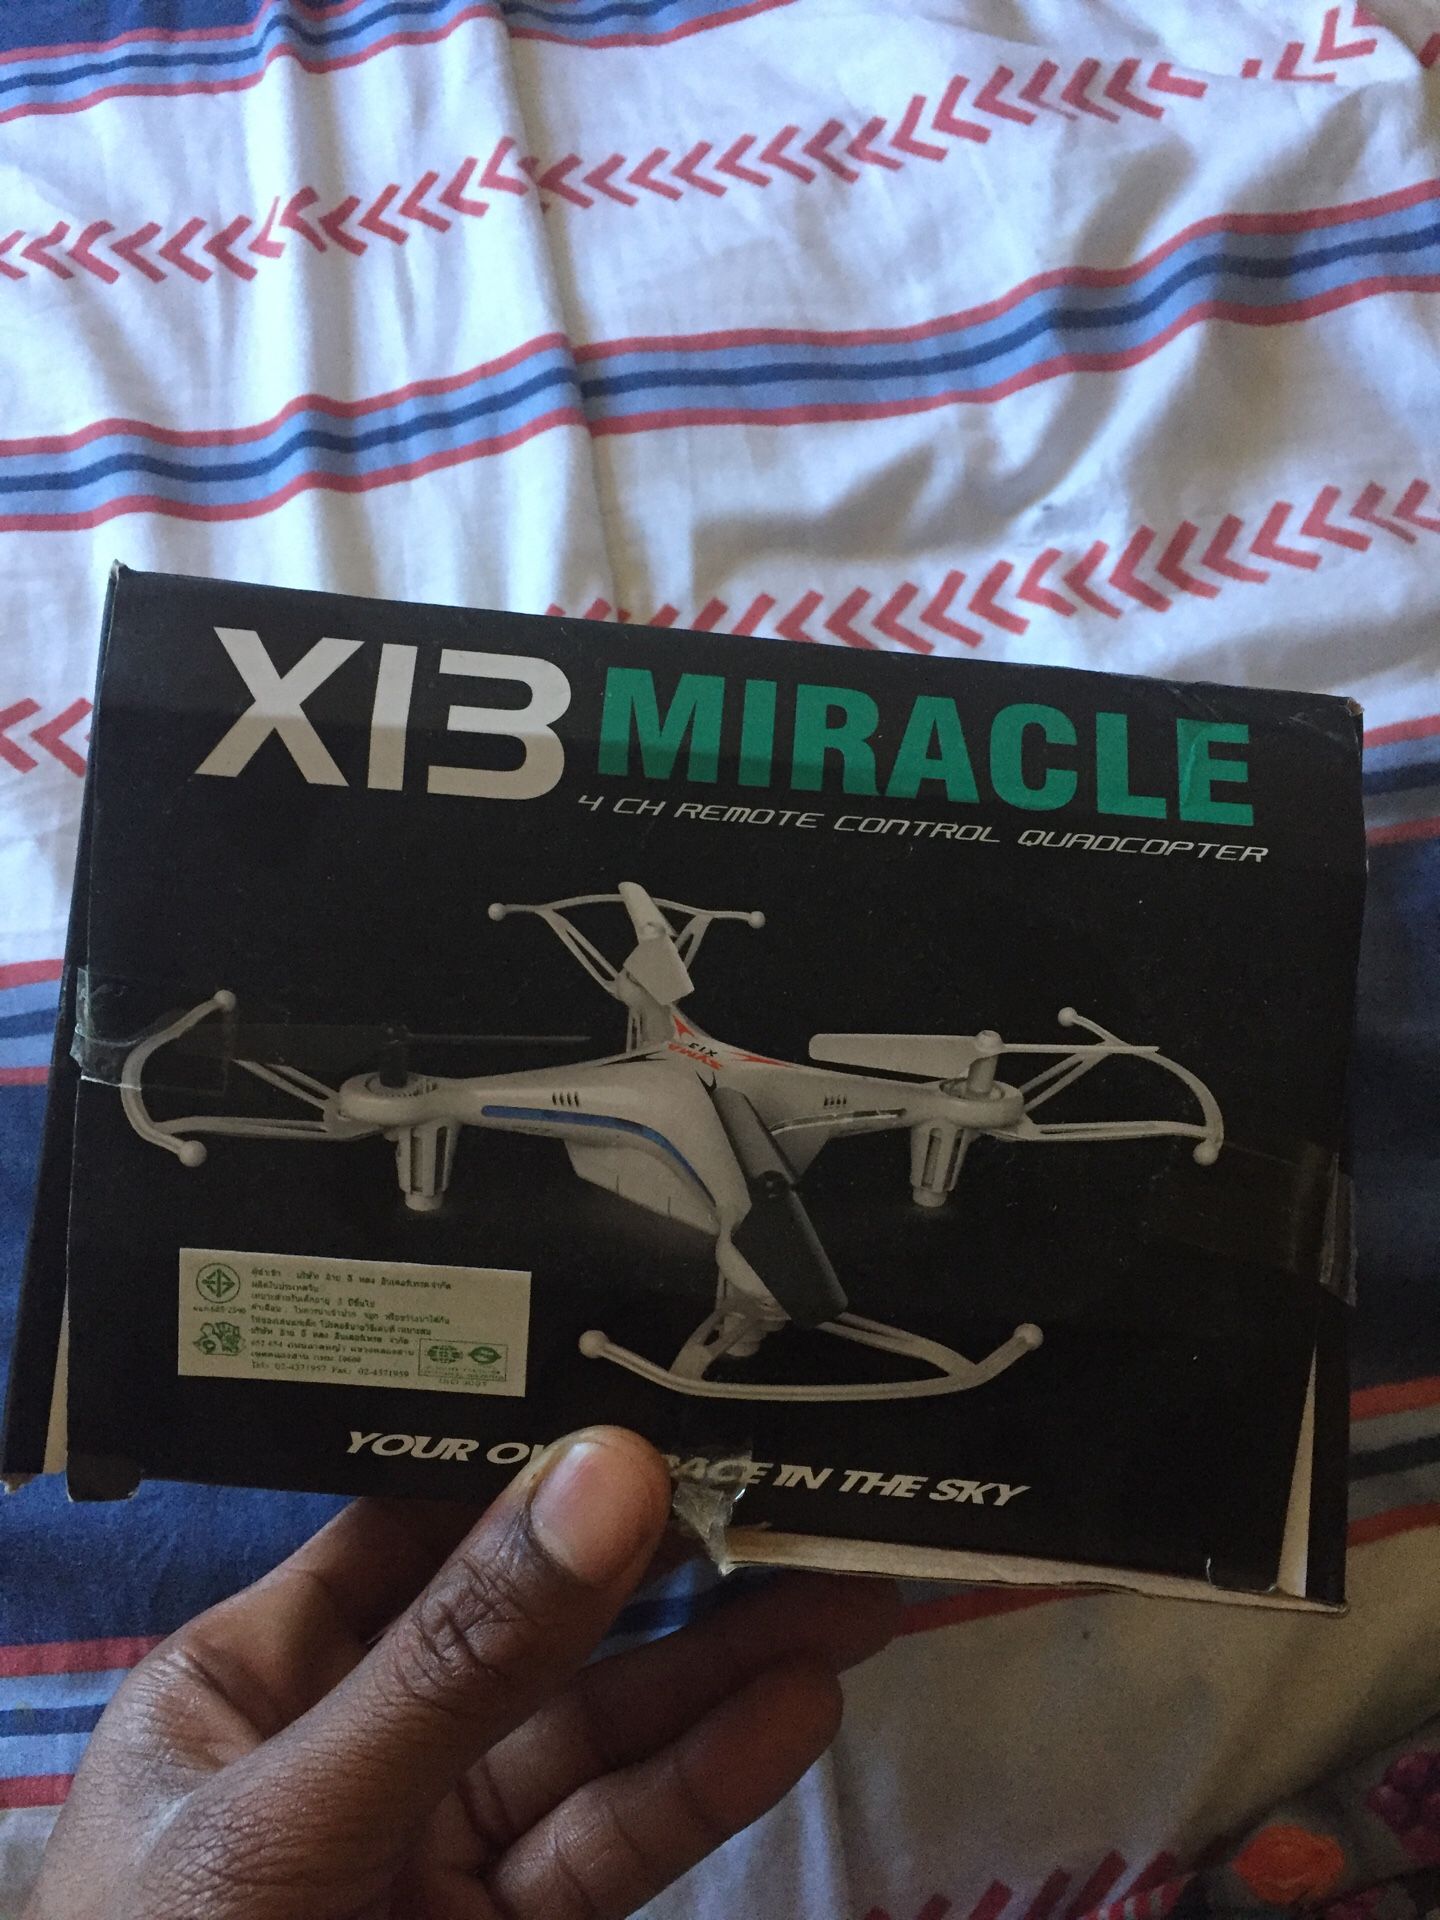 X13 Miracle drone